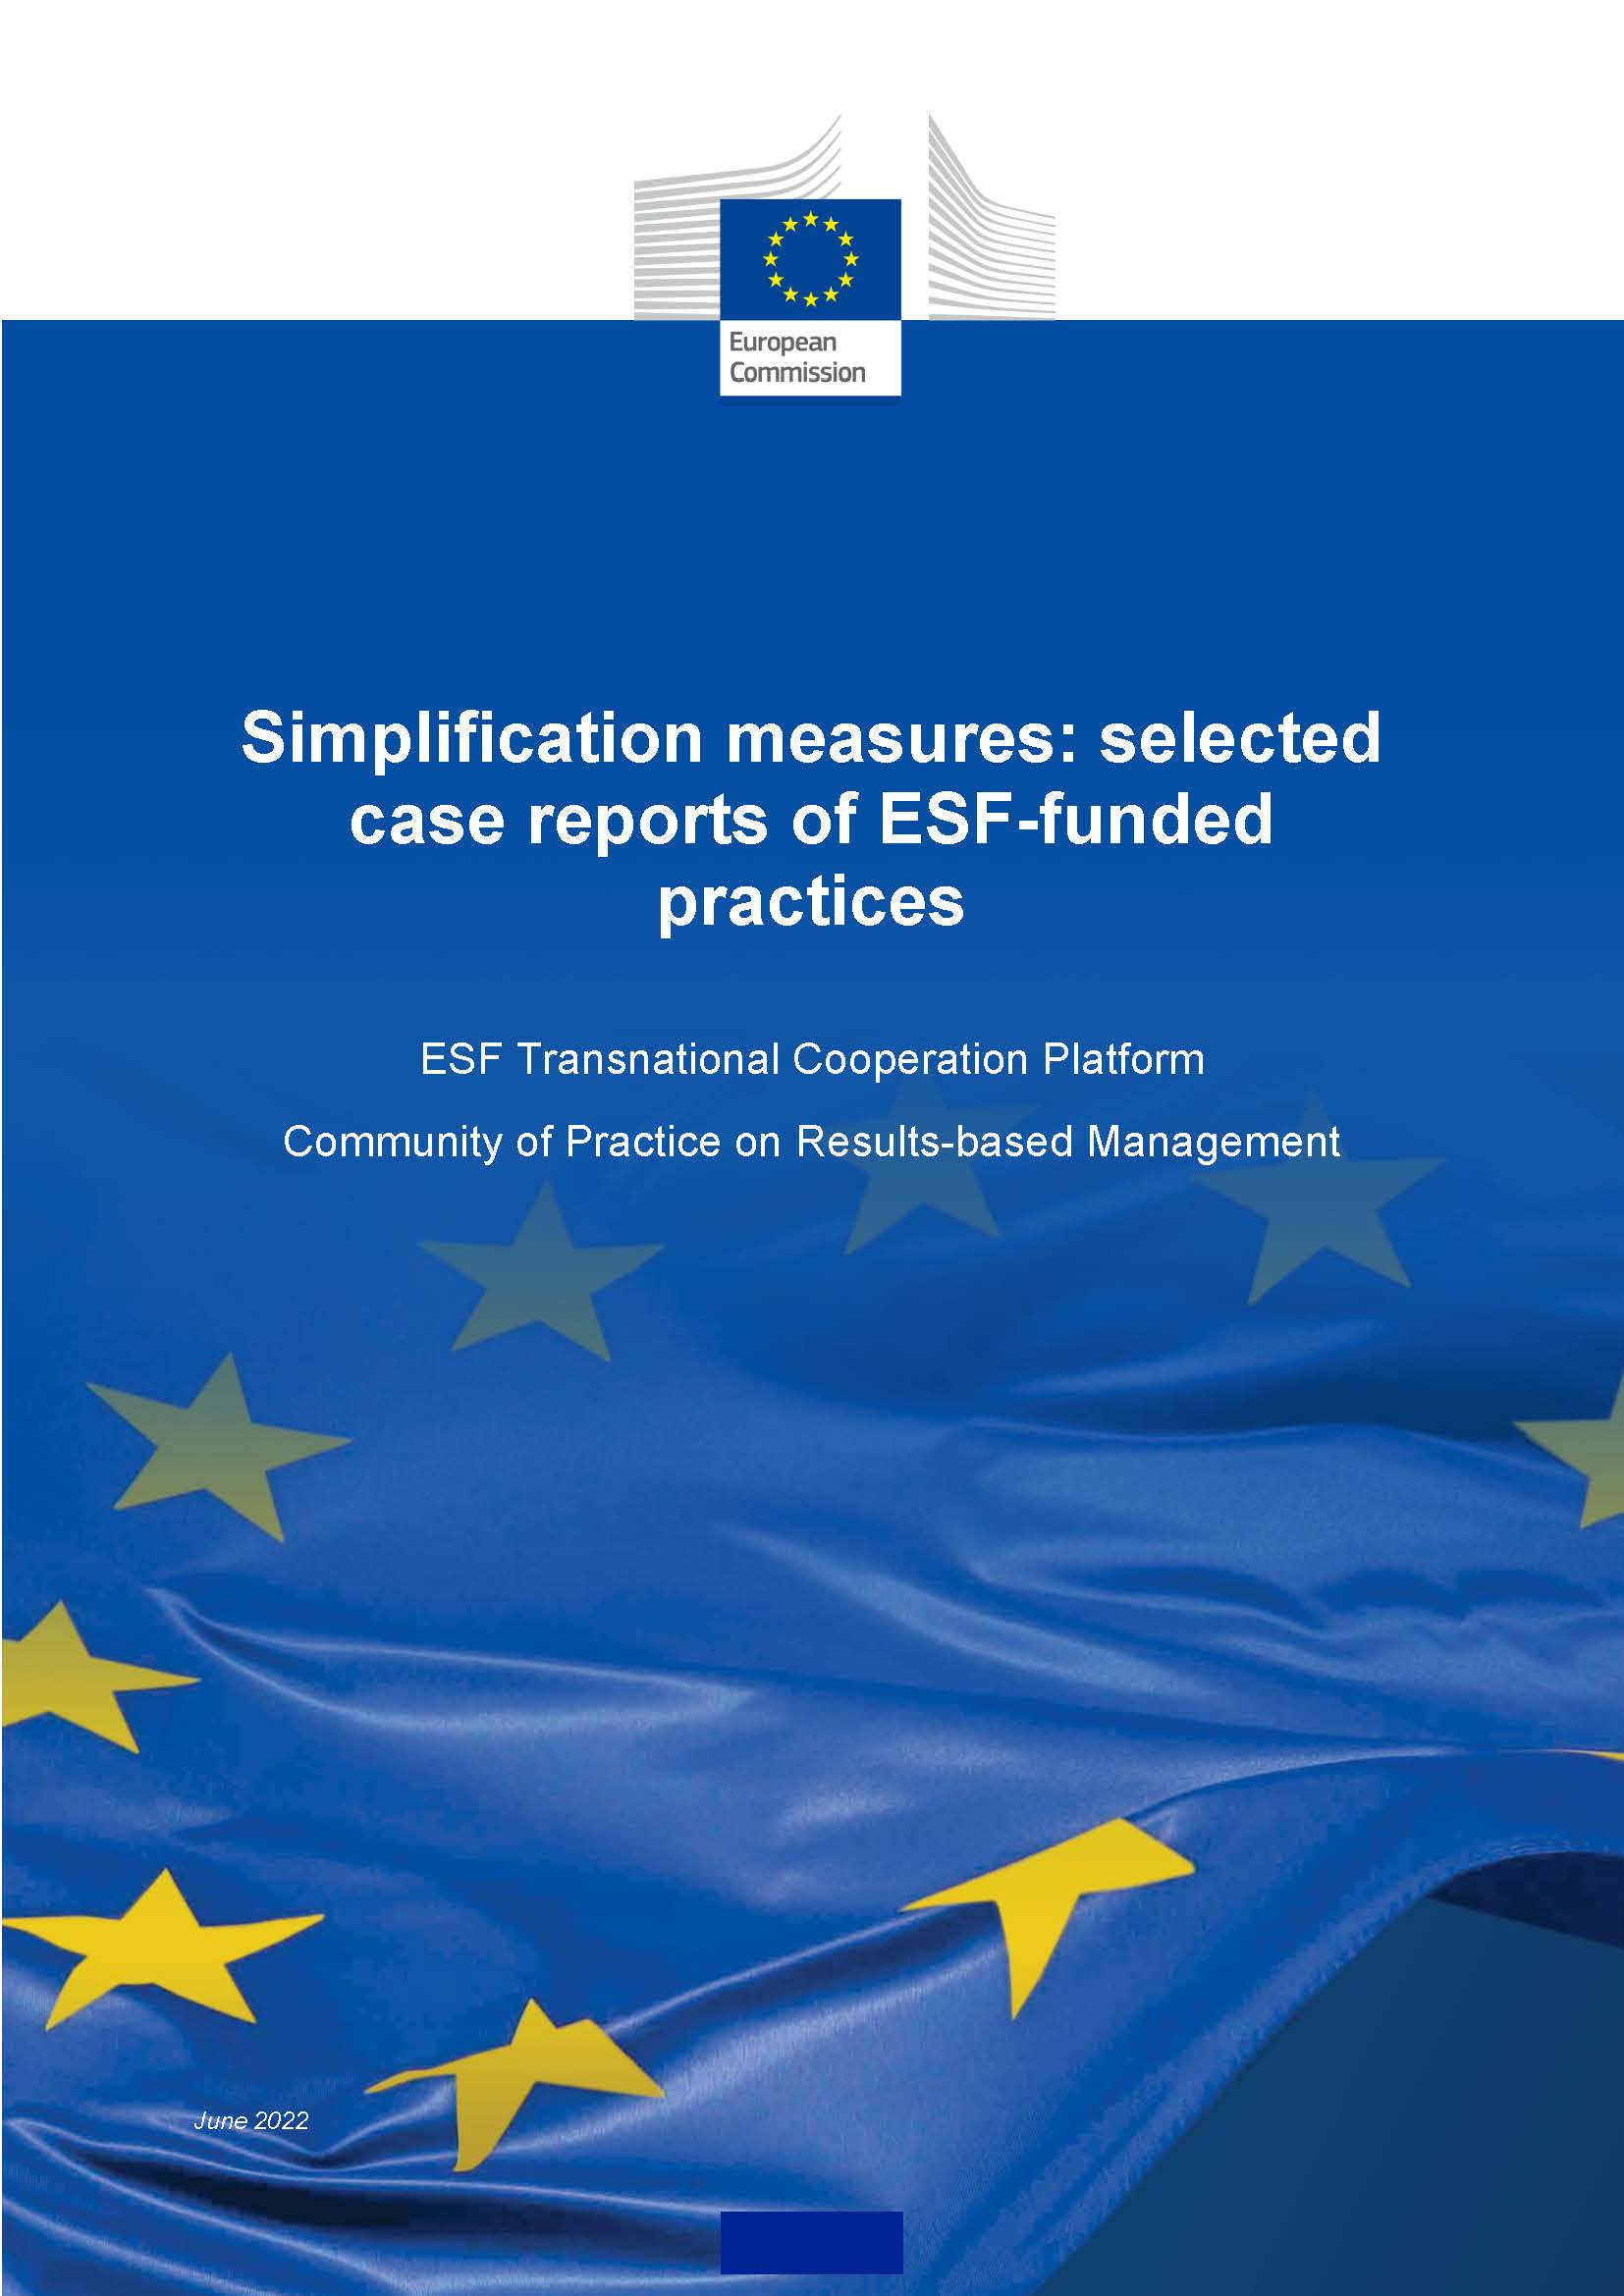 Simplification measures: selected case reports of ESF-funded practices